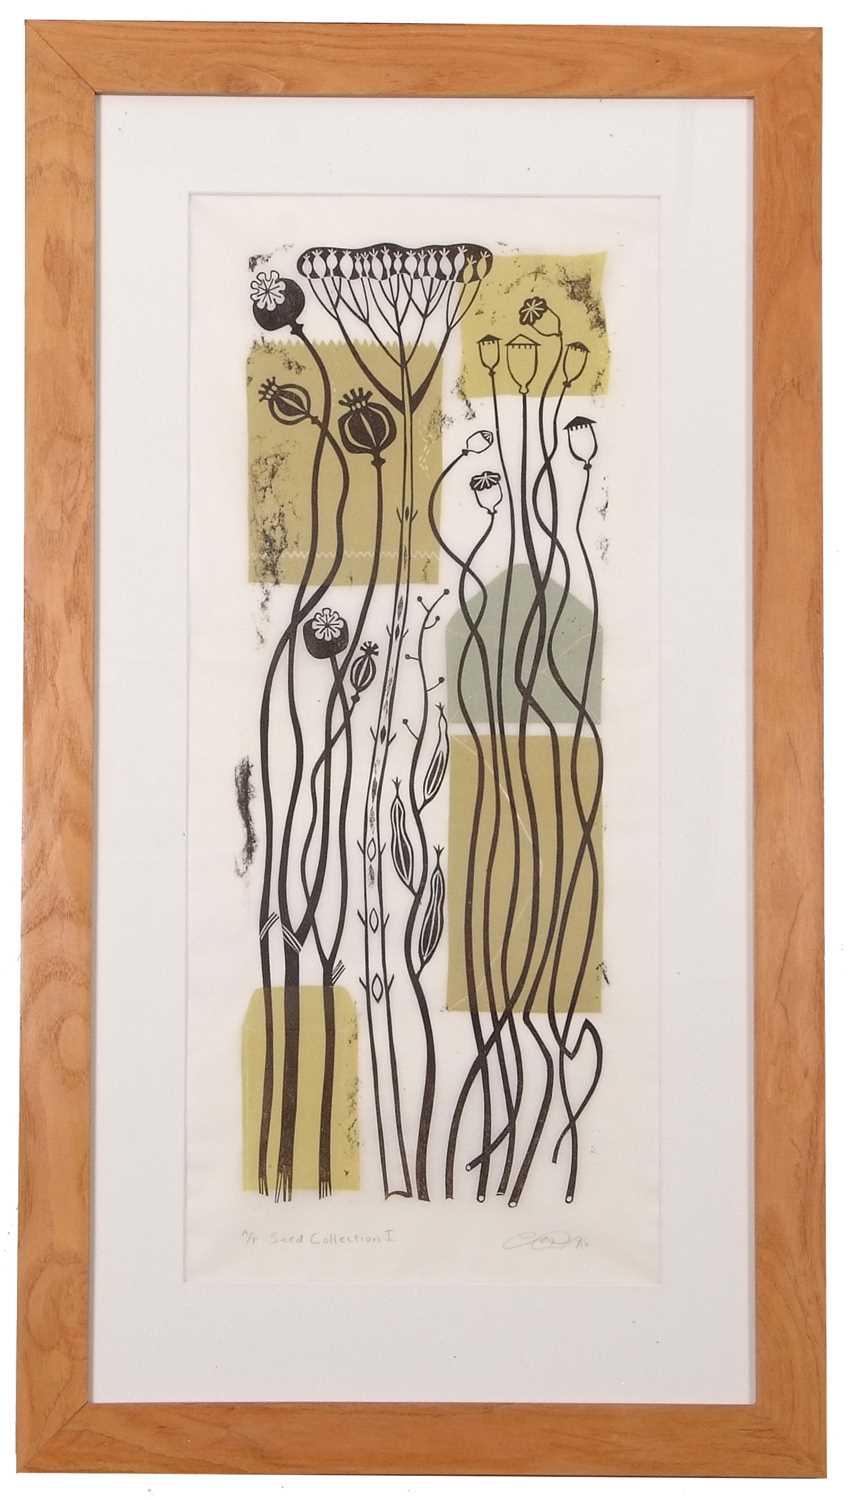 Clare Curtis (British, contemporary), 'Seed Collection I', screenprint, artist proof, signed in